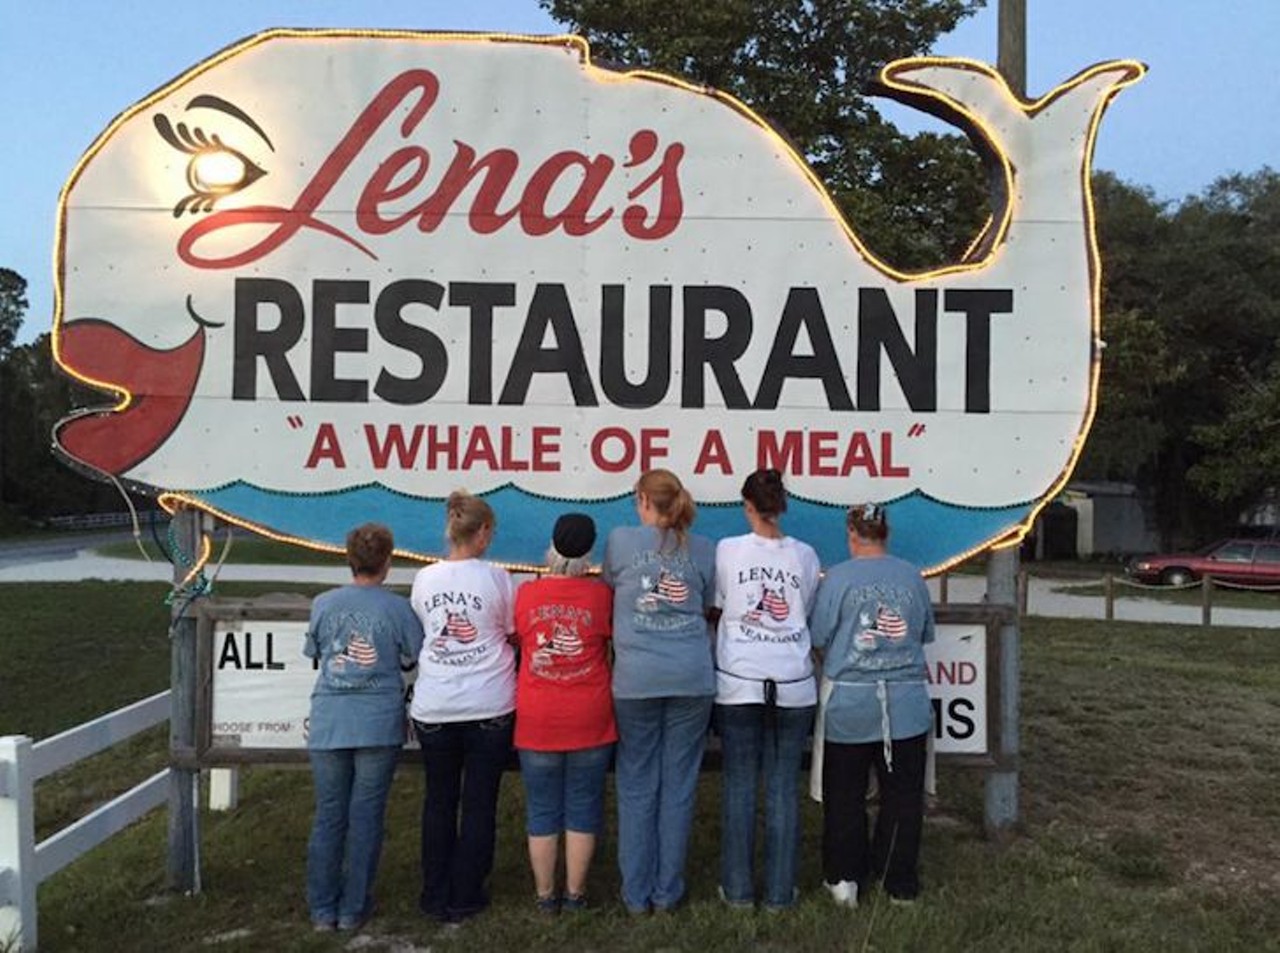 
Lena&#146;s Seafood
18478 E Highway 40, Silver Springs; 352-625-6489
Lena&#146;s menu promises that they serve &#147;New England seafood with southern hospitality&#148; and they definitely deliver, serving up a simple menu of fish nuggets, shrimp, clams and more.
Photo via Lena&#146;s Seafood Florida/Facebook